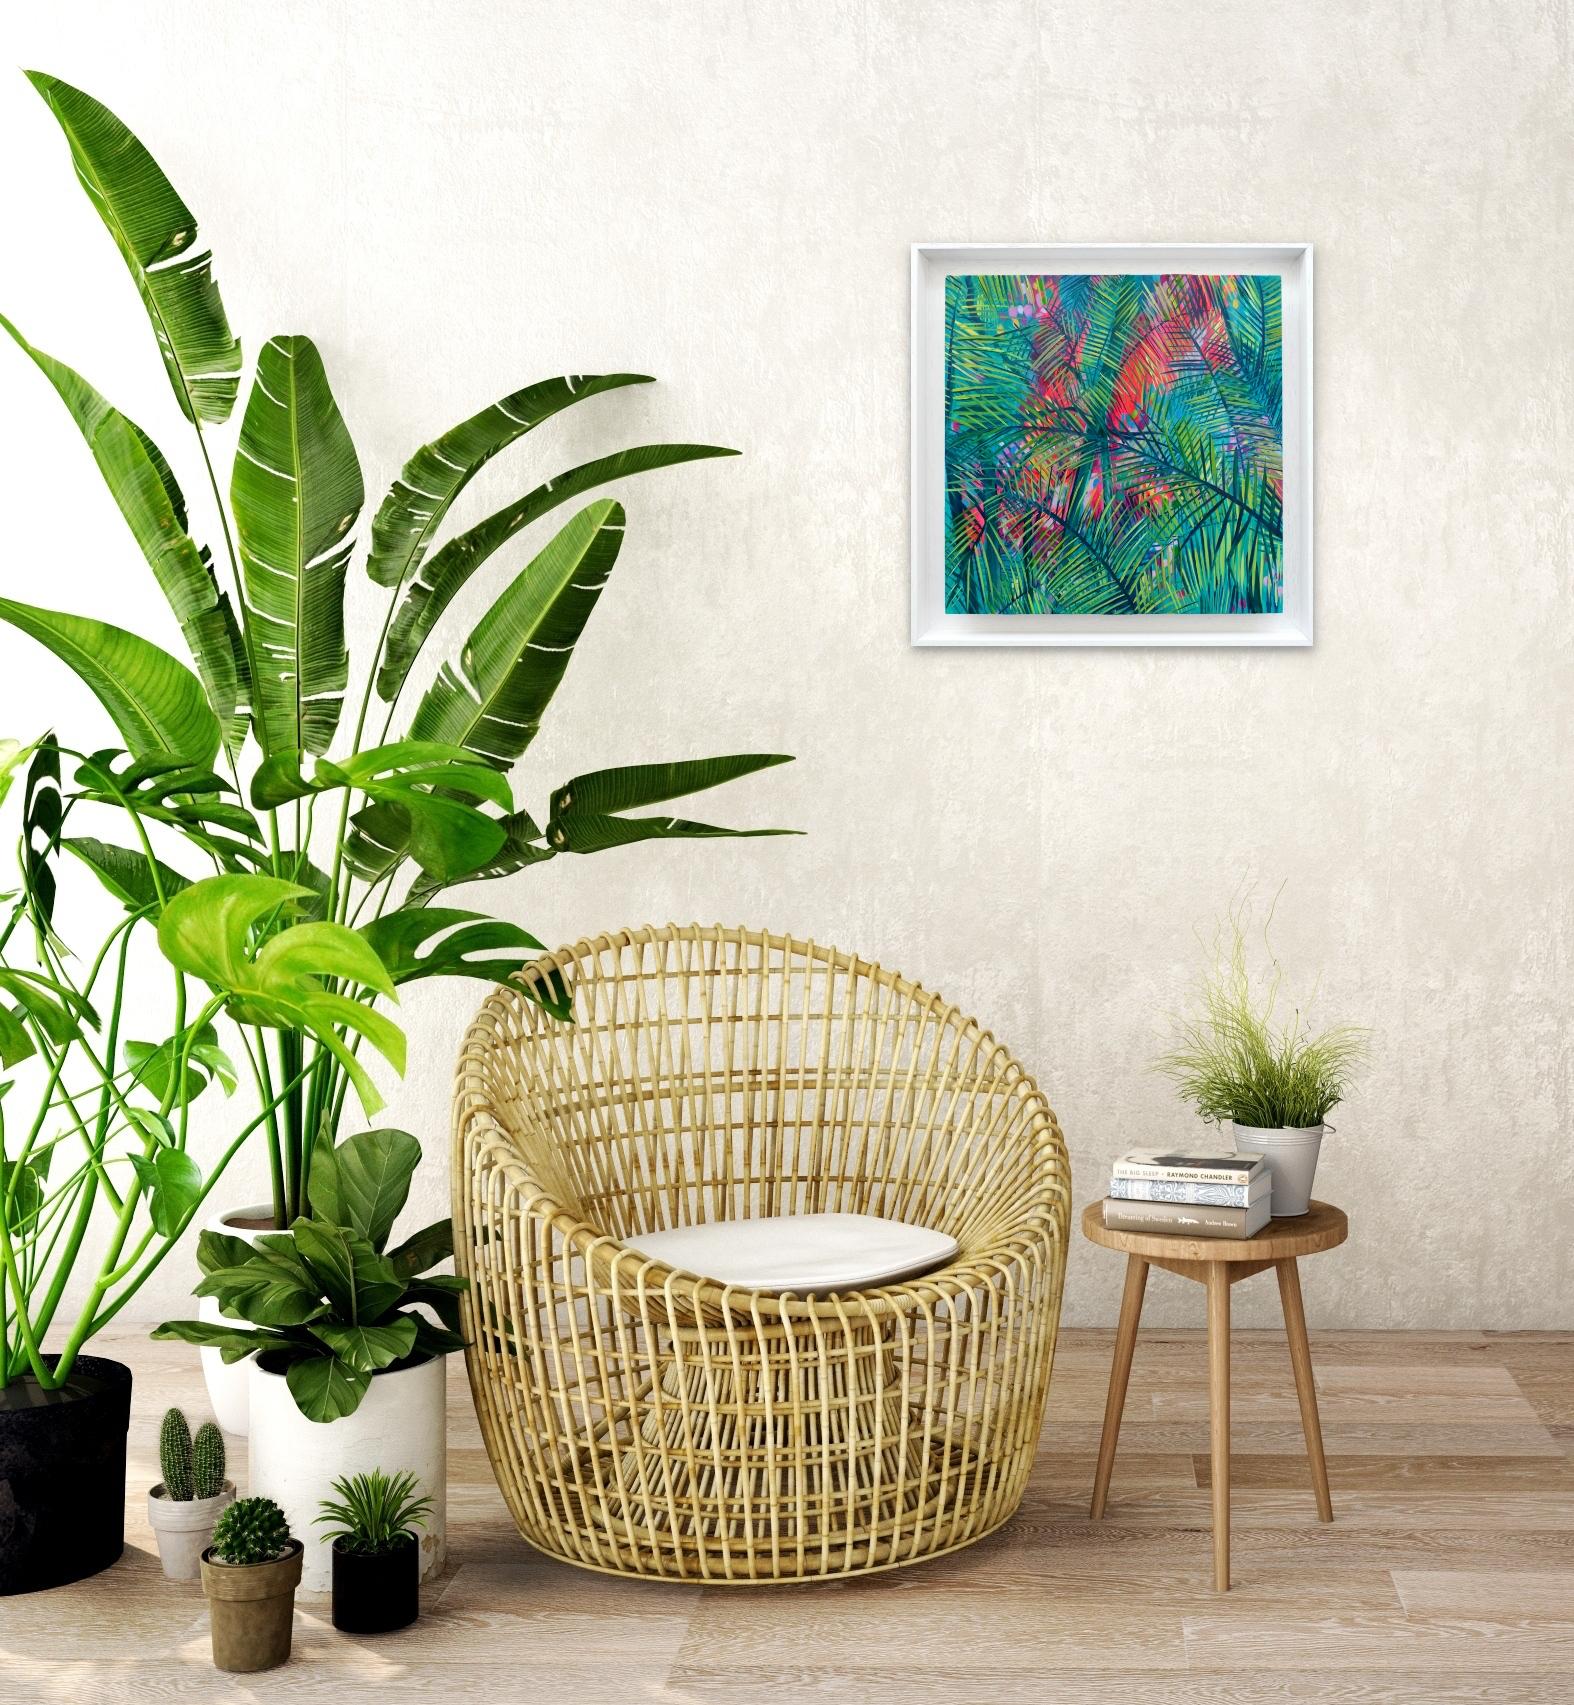 Tropical Garden VIII - Blue Abstract Painting by Alanna Eakin